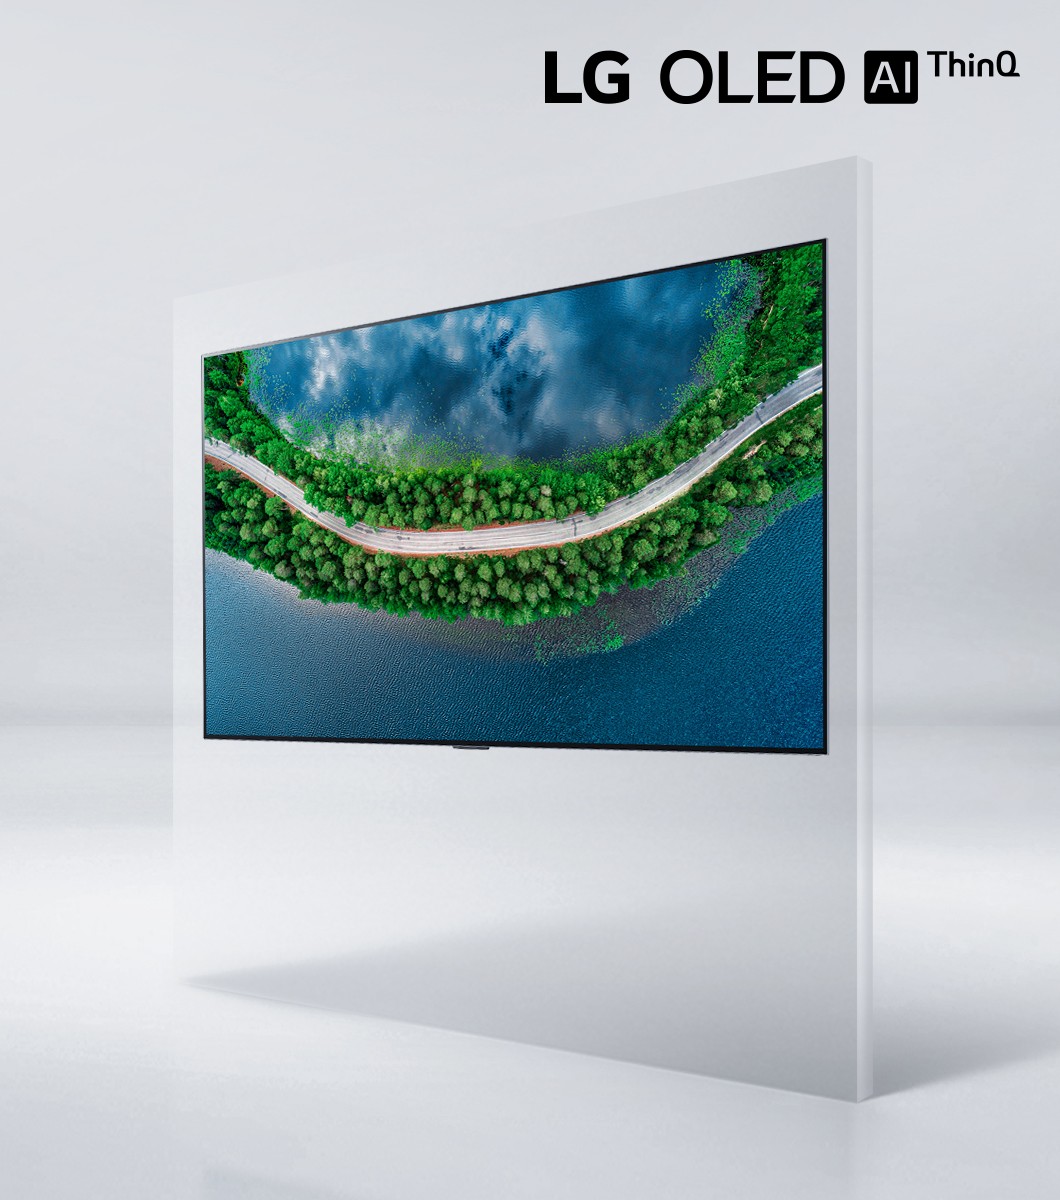 Right side view of LG OLED TV GX displaying a coastal road surrounded by trees, with the LG OLED AI thinQ logo above